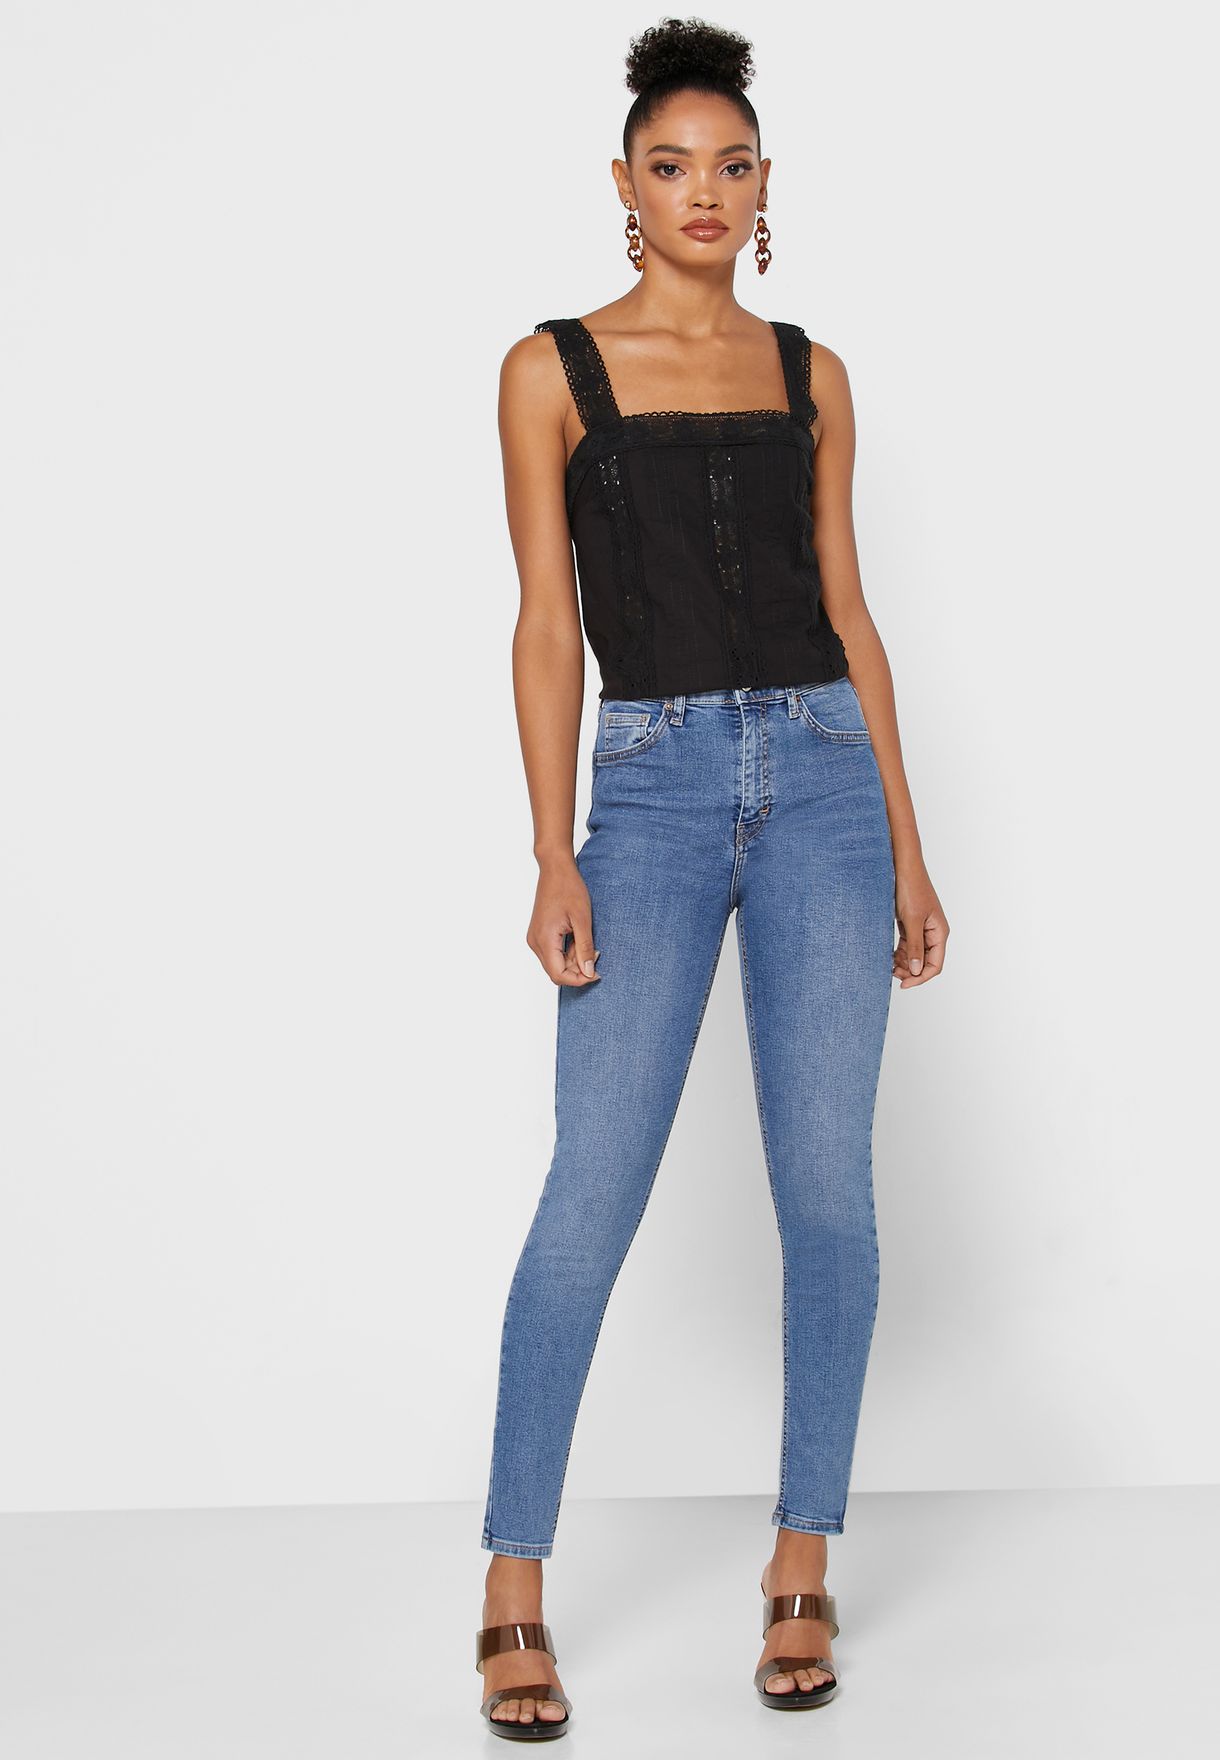 topshop moto high waisted jeans